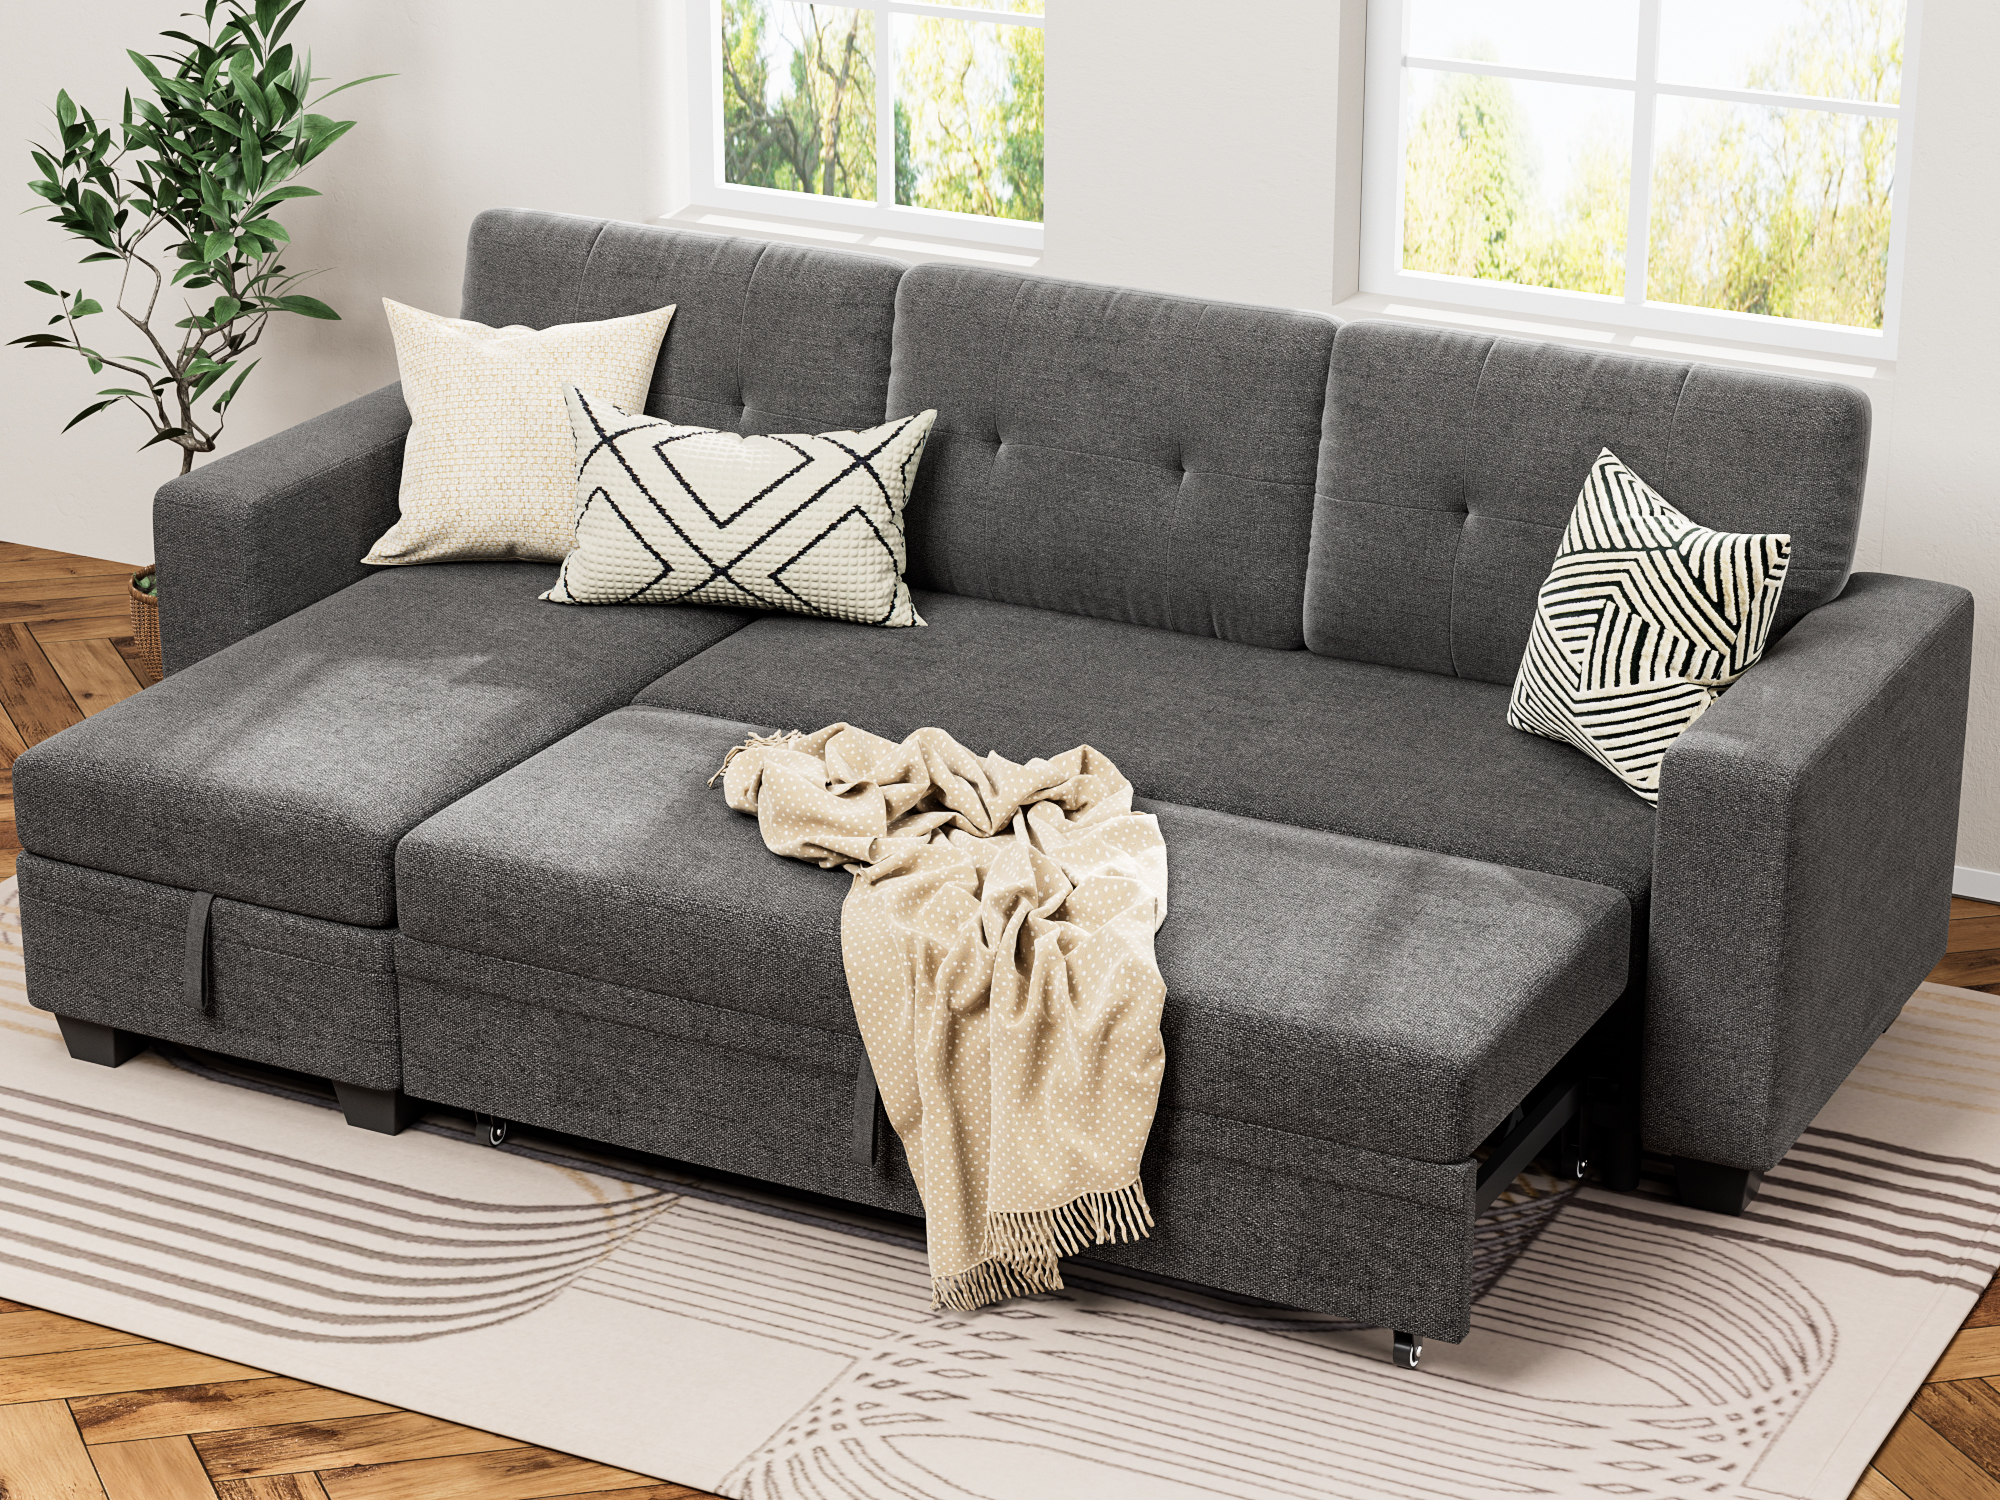 Furmax 78.3'' W Convertible L-Shape Sofa with Storage Chaise and Pull-out Sofa Bed, Fabric Sectional Couch , Gray - image 1 of 10